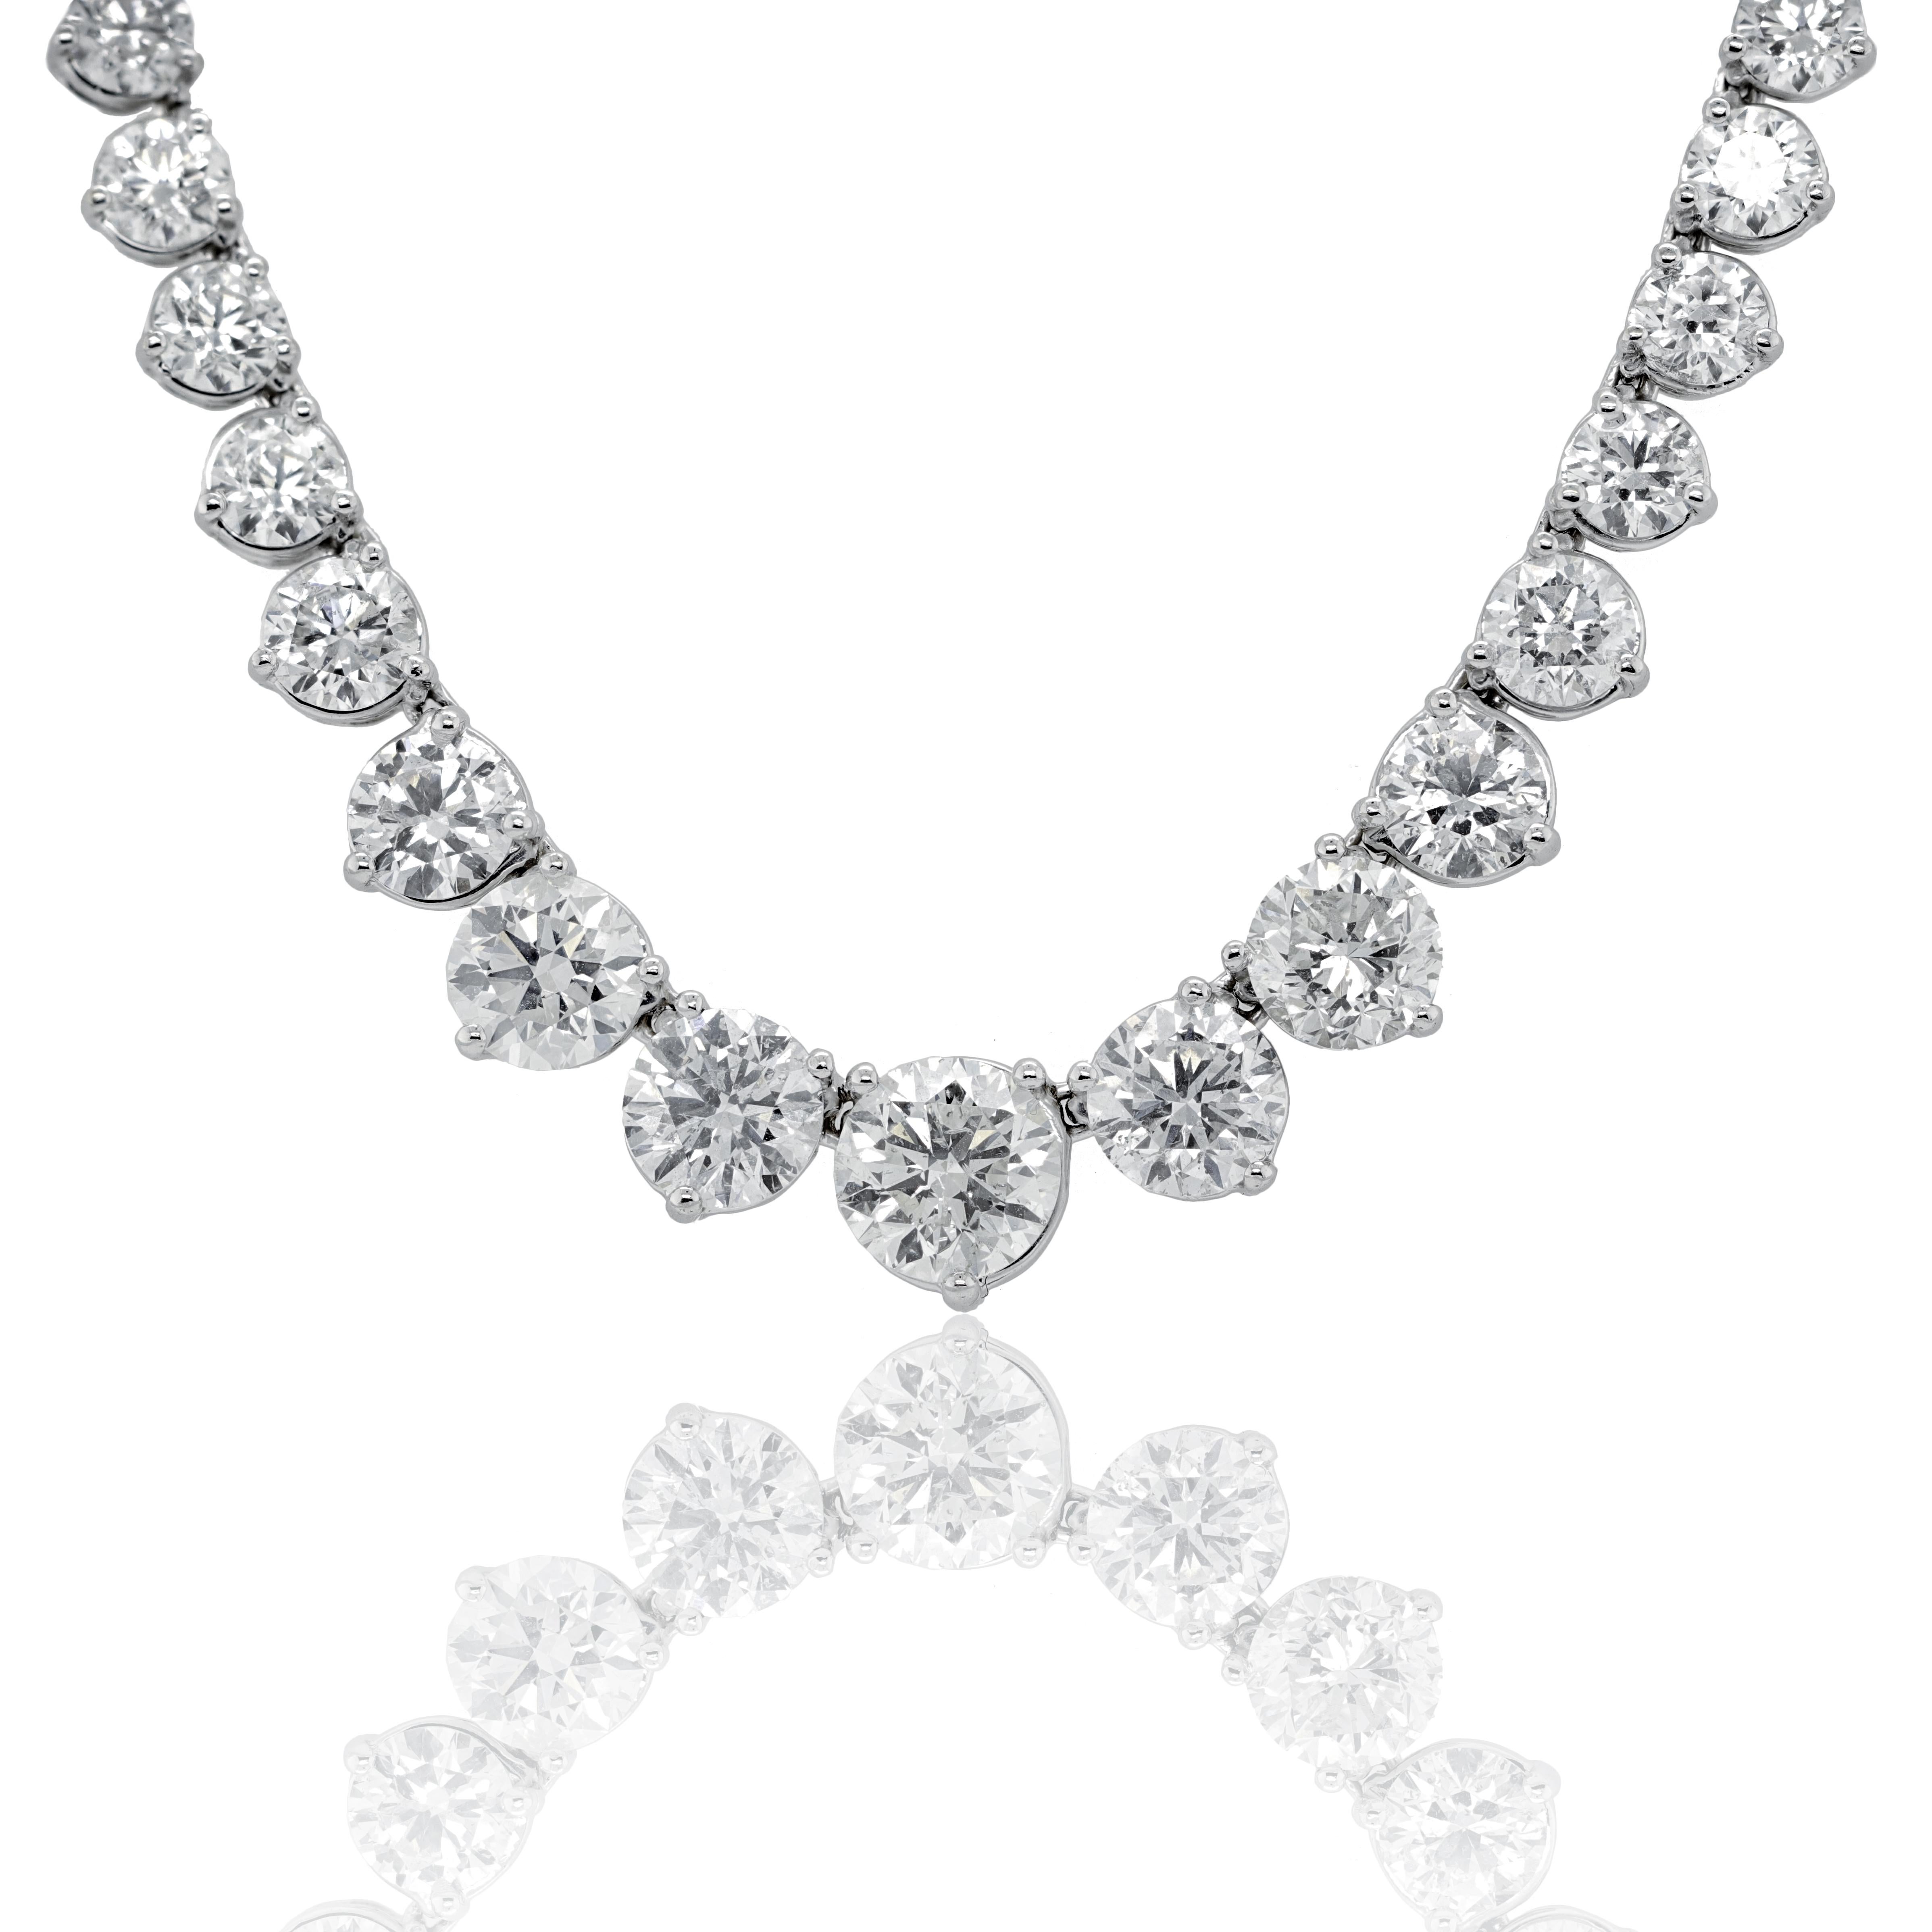 18kt white gold graduated tennis necklace featuring 24.45 cts of round brilliant diamons set in a 3 prong setting.
Diana M. is a leading supplier of top-quality fine jewelry for over 35 years.
Diana M is one-stop shop for all your jewelry shopping,